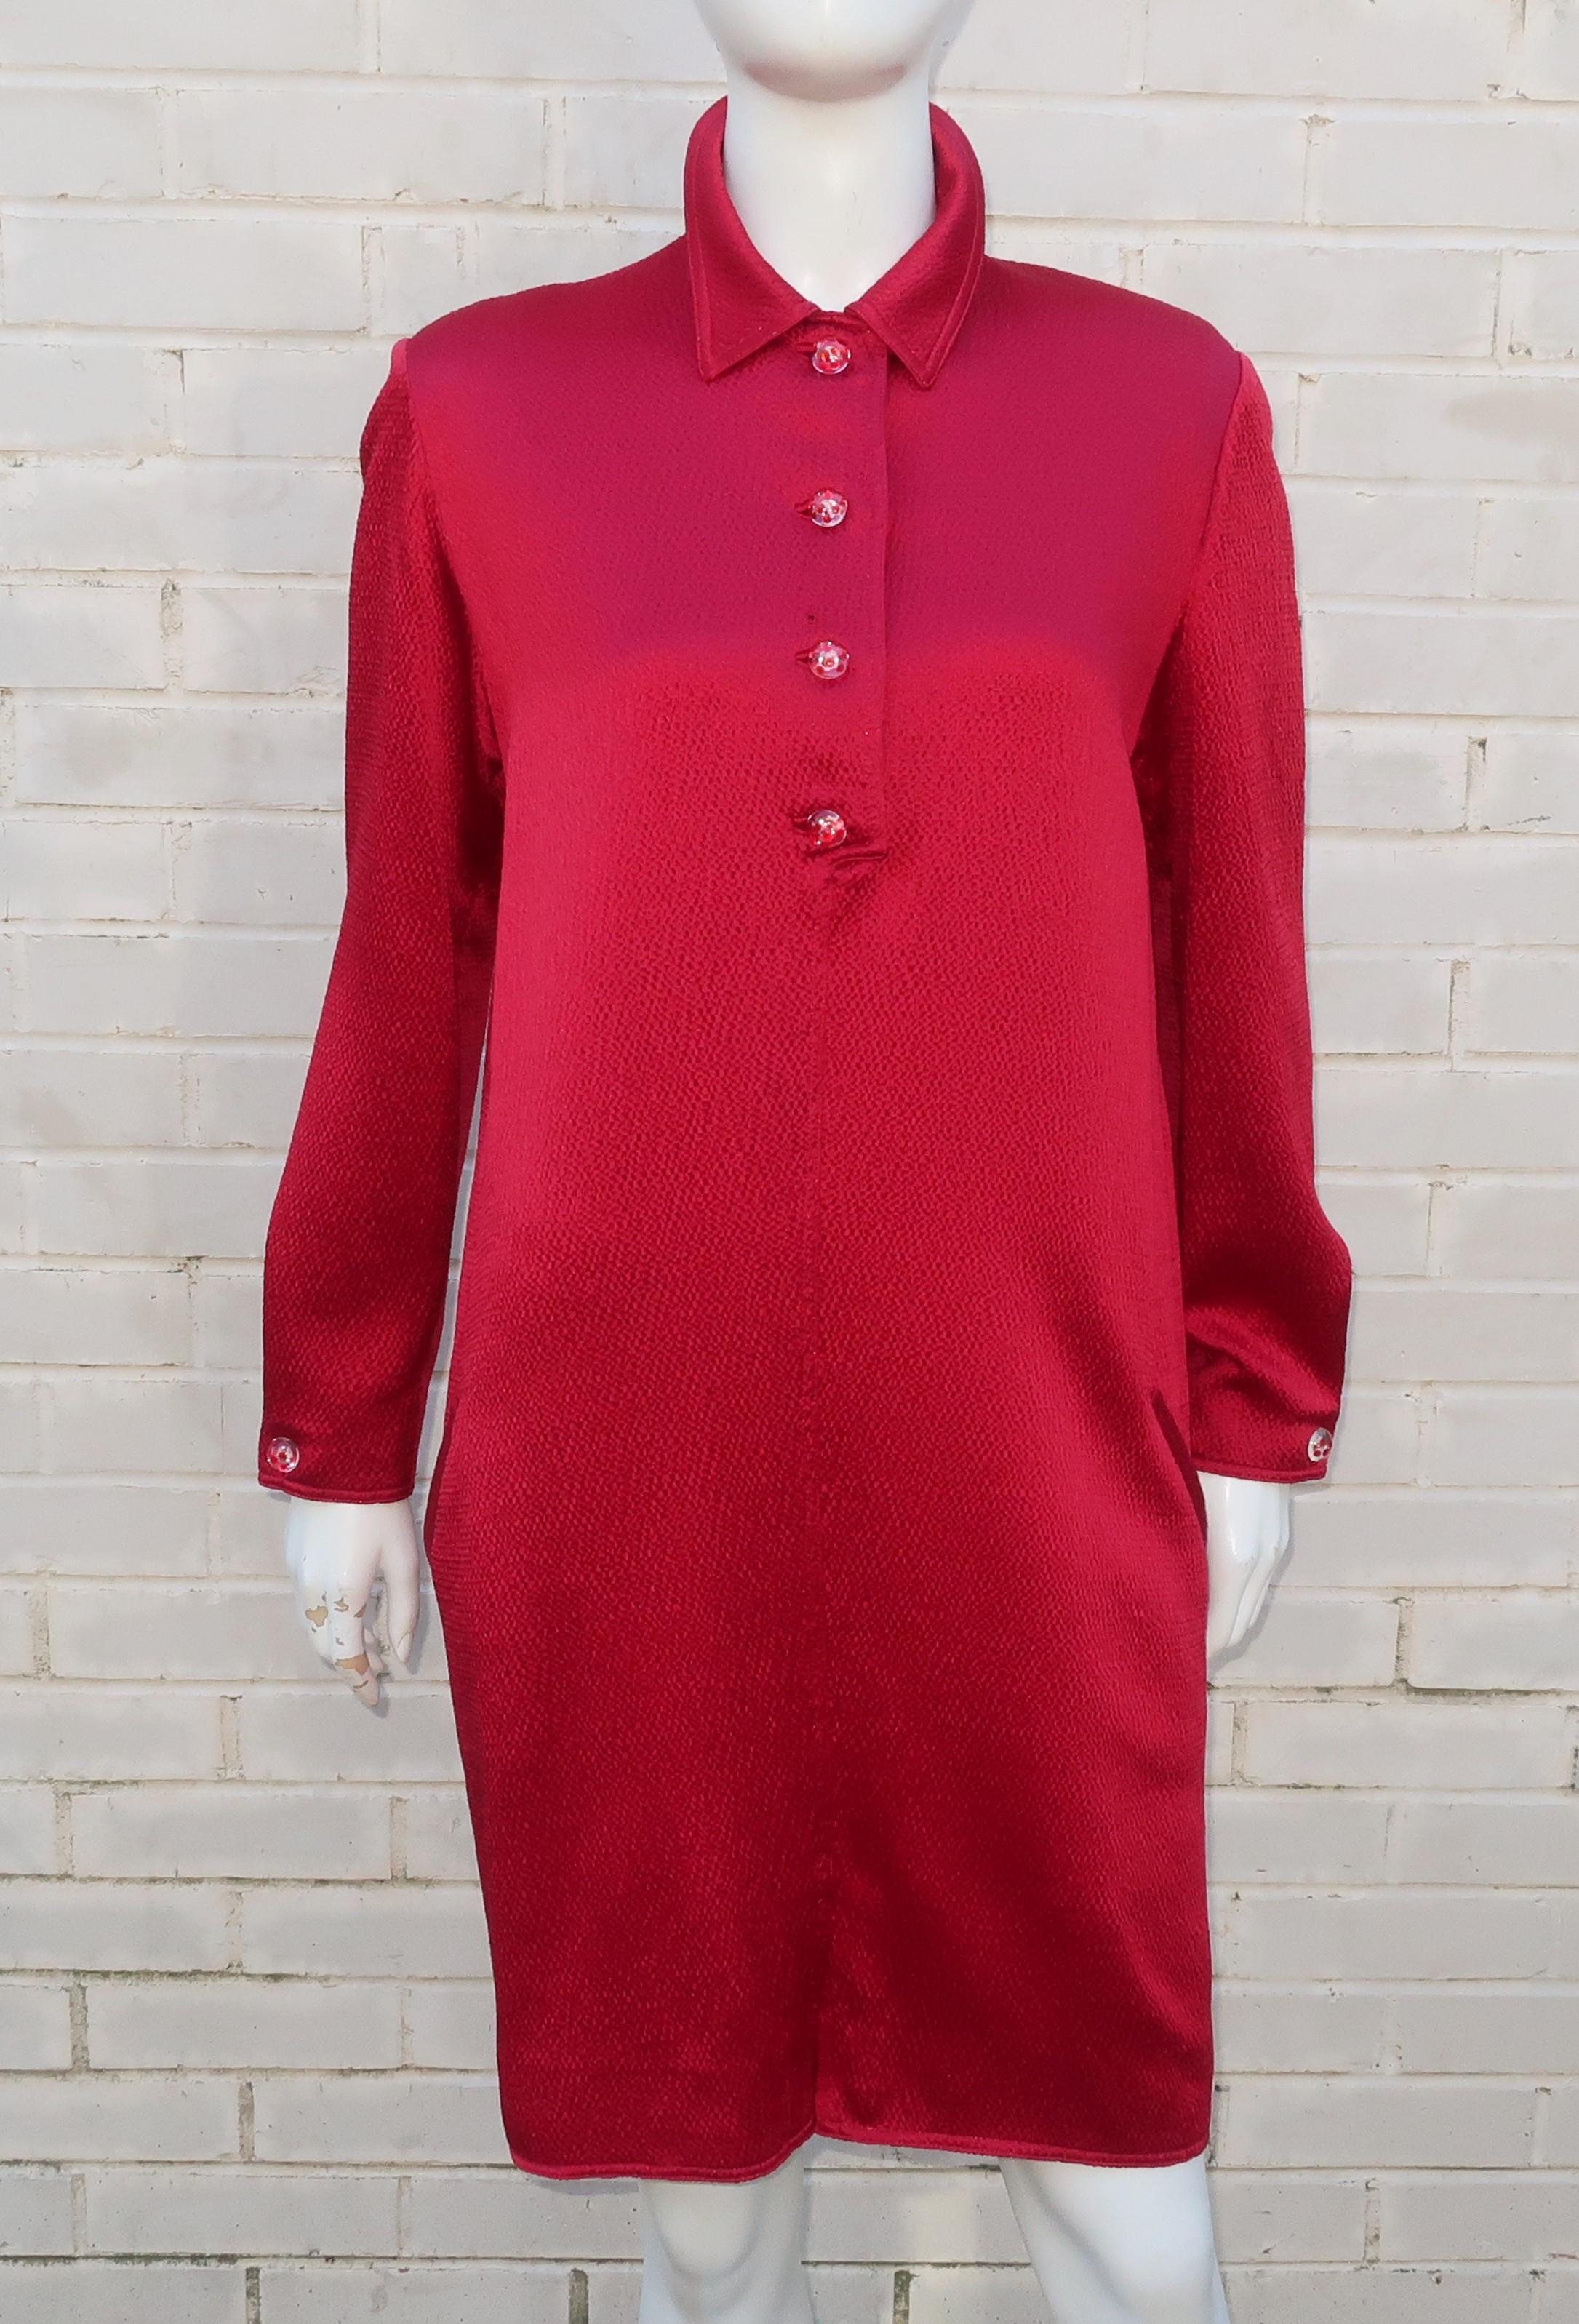 Women's Geoffrey Beene Ruby Red Satin Shirt Dress With Lucite Buttons, 1980's